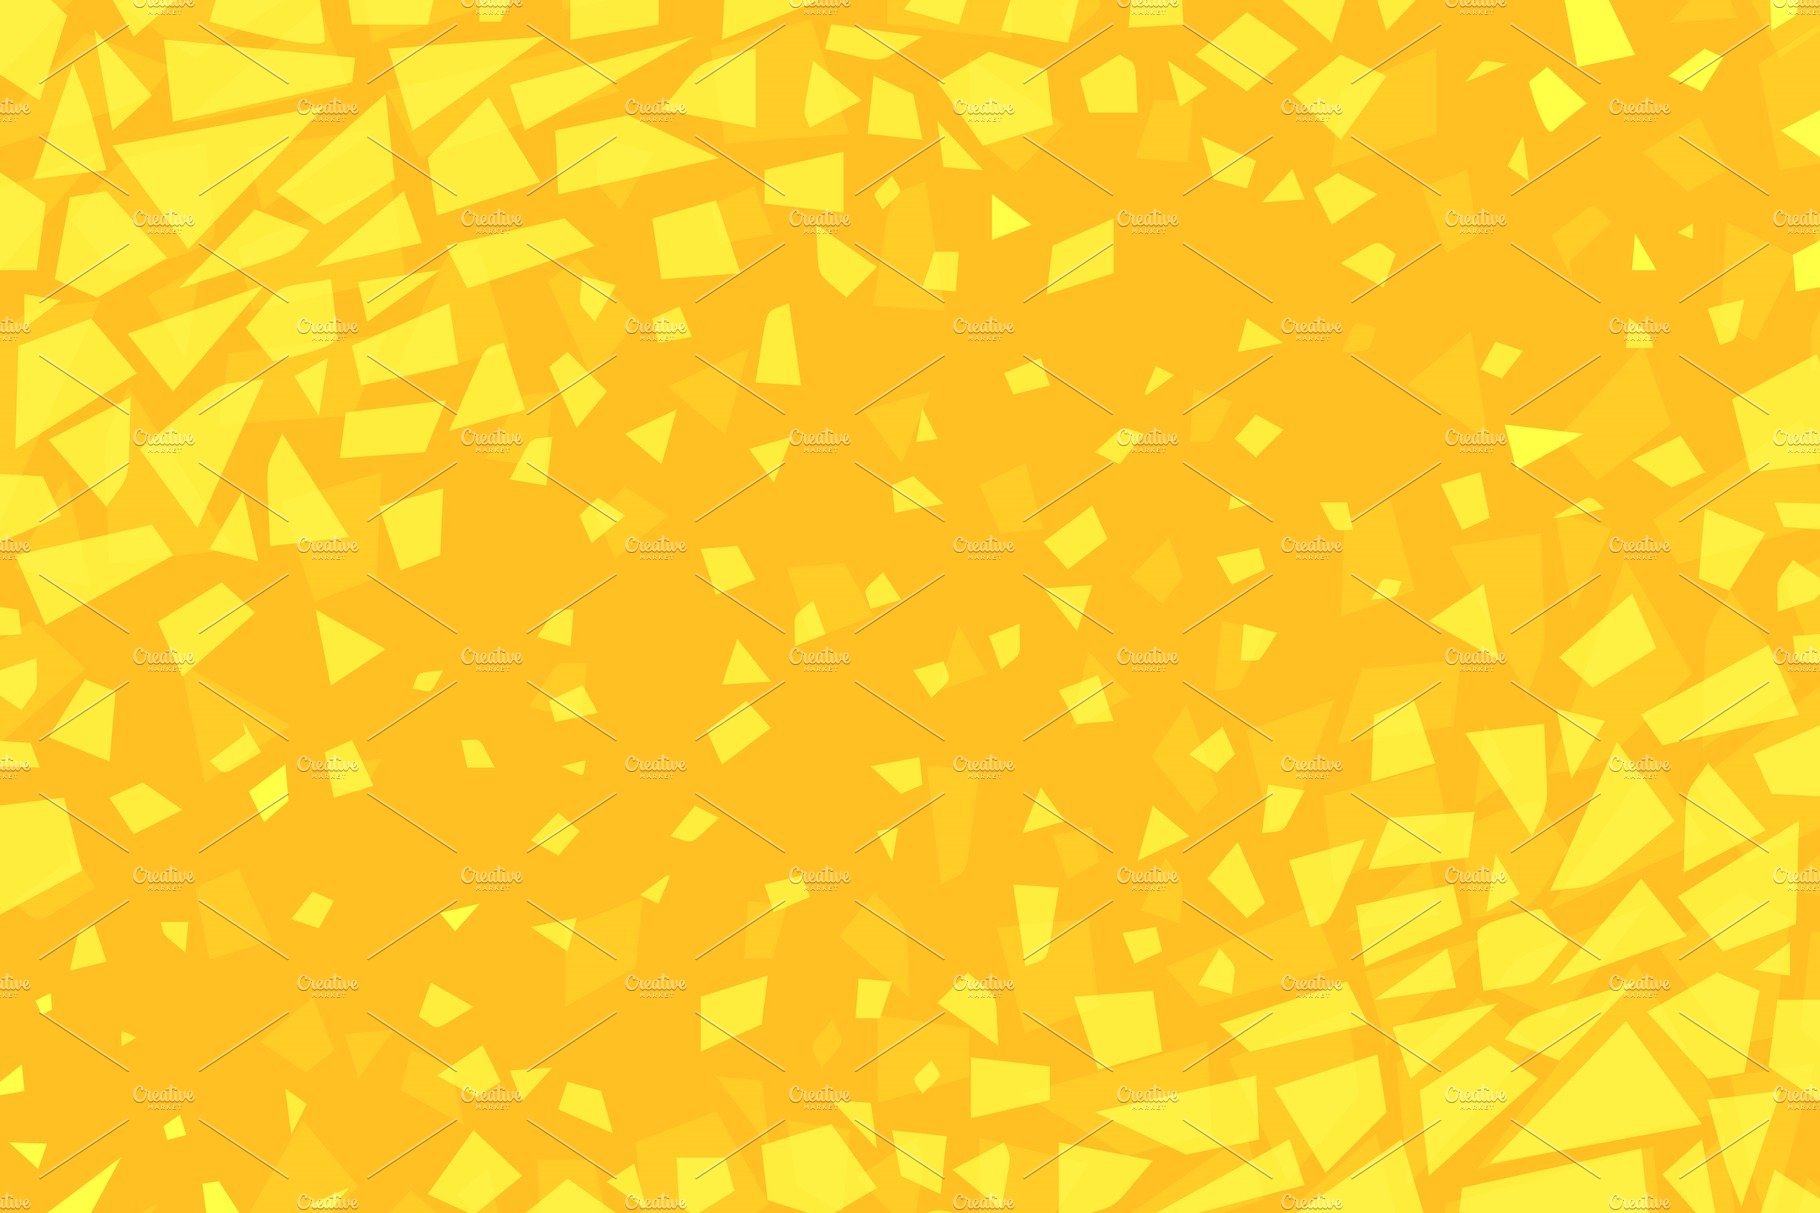 Cracked yellow background cover image.